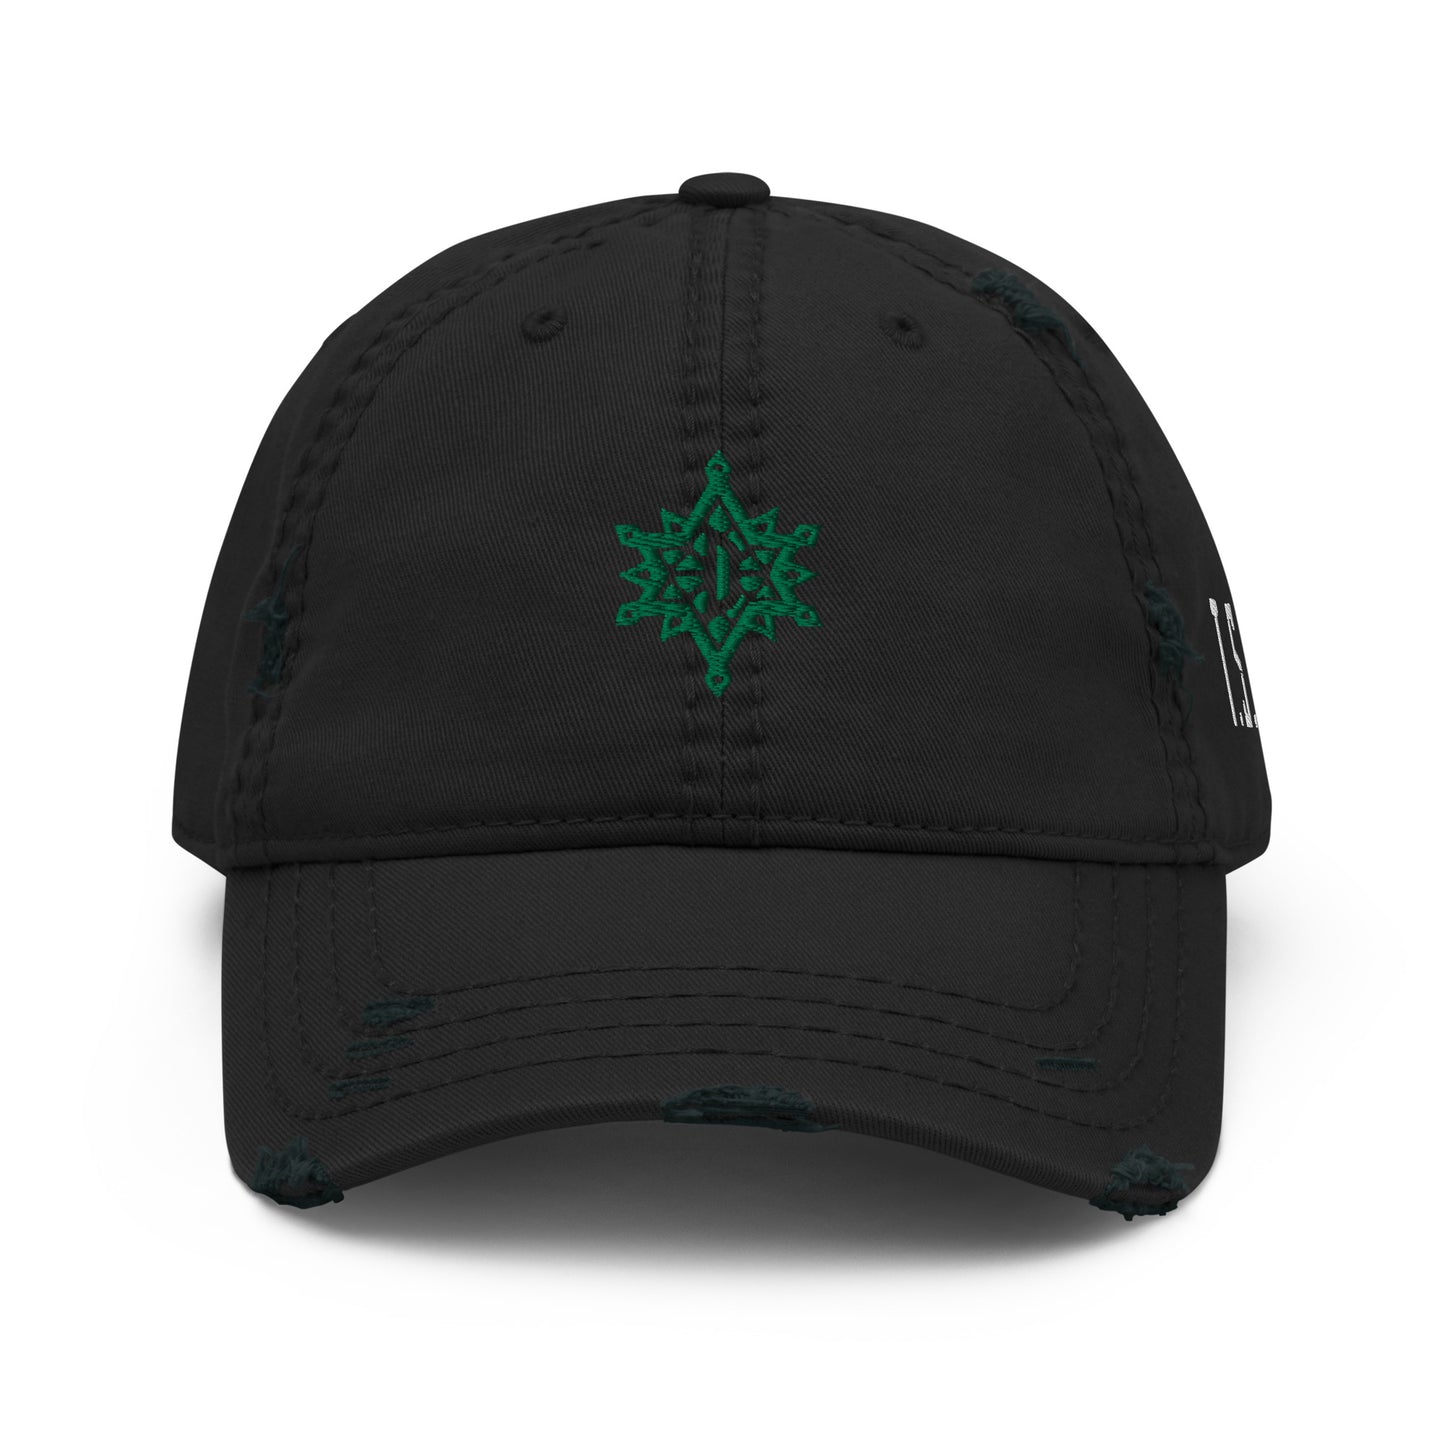 "Diamond of Snow" Distressed Dad Hat Gone Green